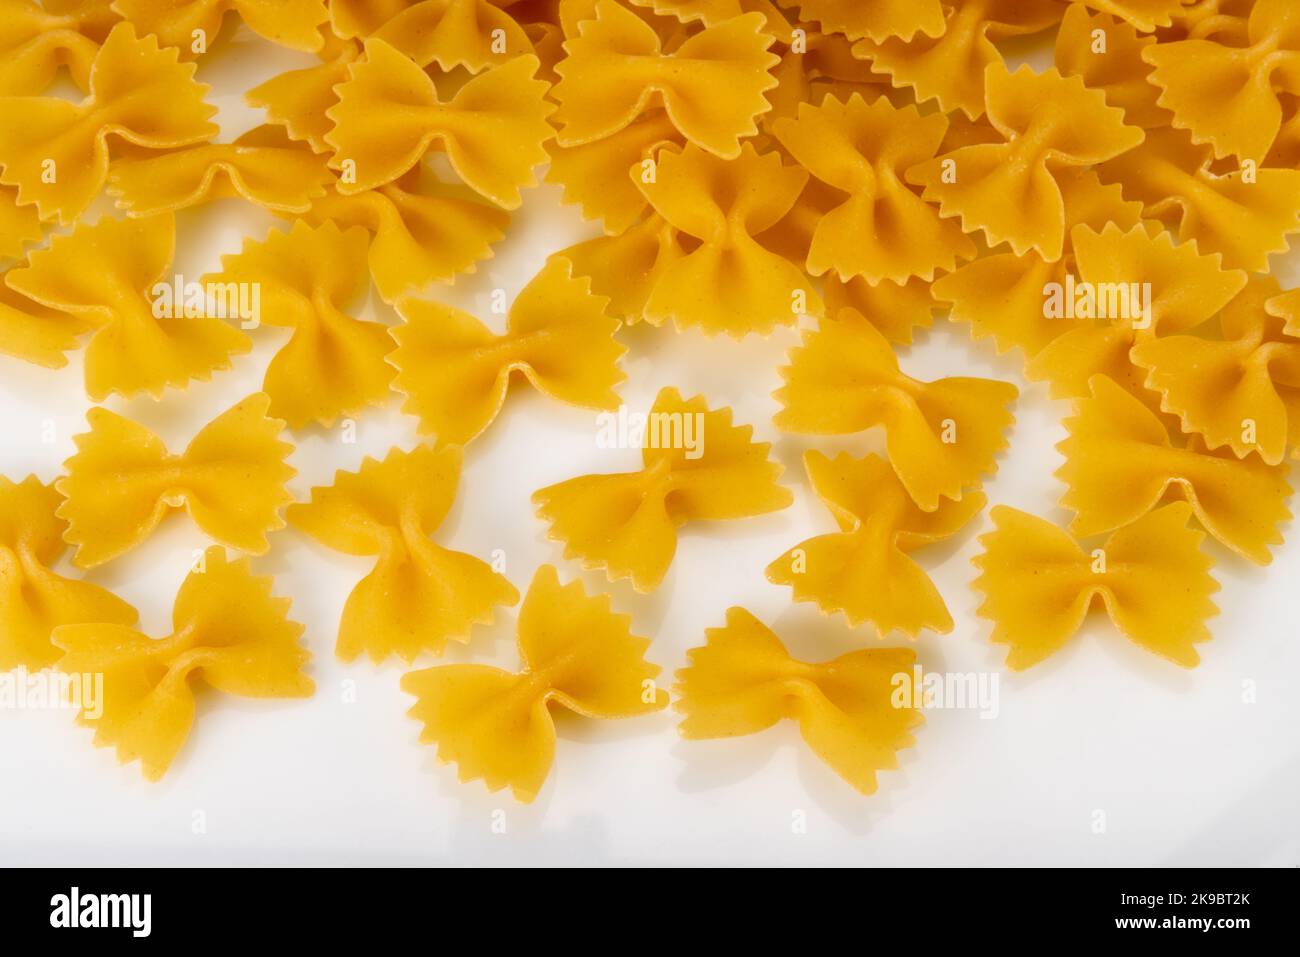 Italian pasta called farfalle, raw macaroni in the shape of bow tie isolated on white, top view Stock Photo